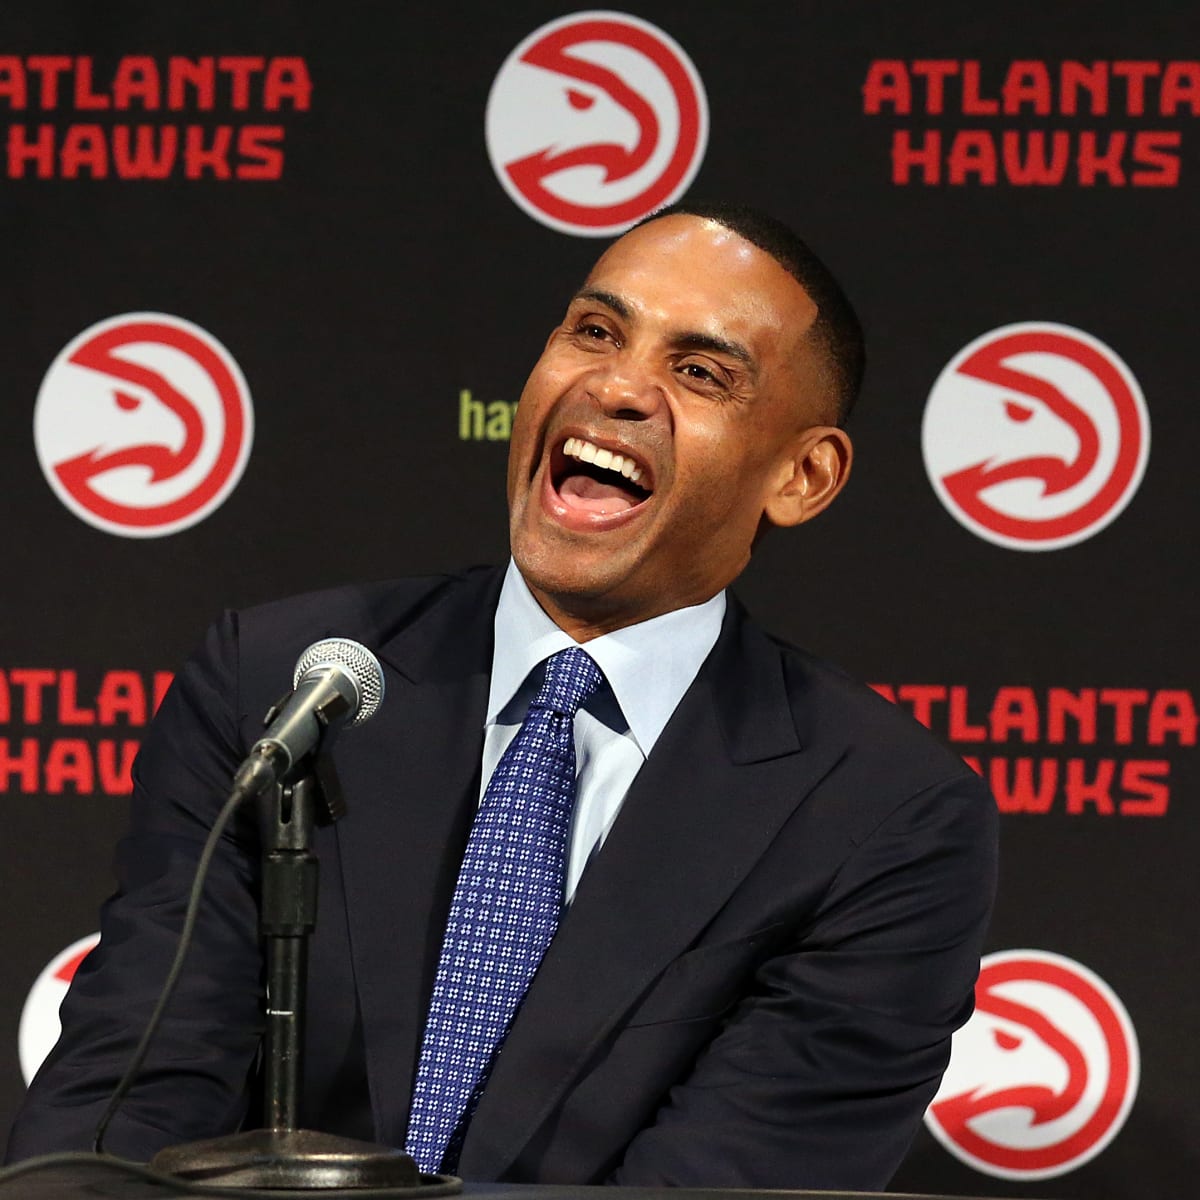 Why Grant Hill Almost Died for the Game He Loved - Video